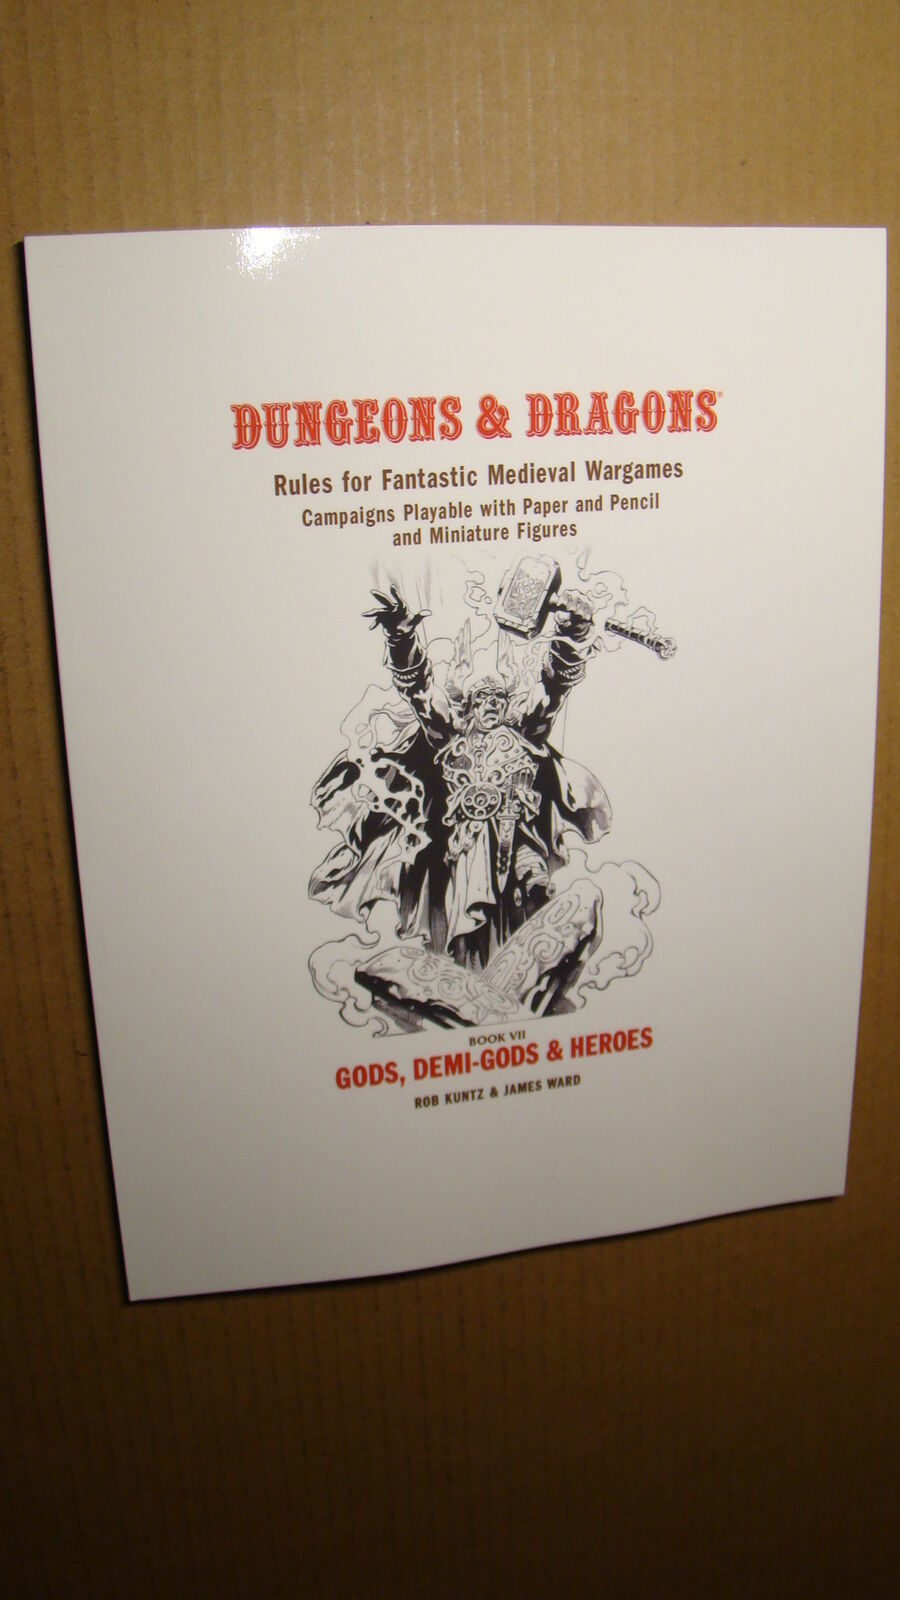 DUNGEONS DRAGONS - GODS, DEMI-GODS & HEROES BOOK VII *NEW* MONSTERS GYGAX - $22.50